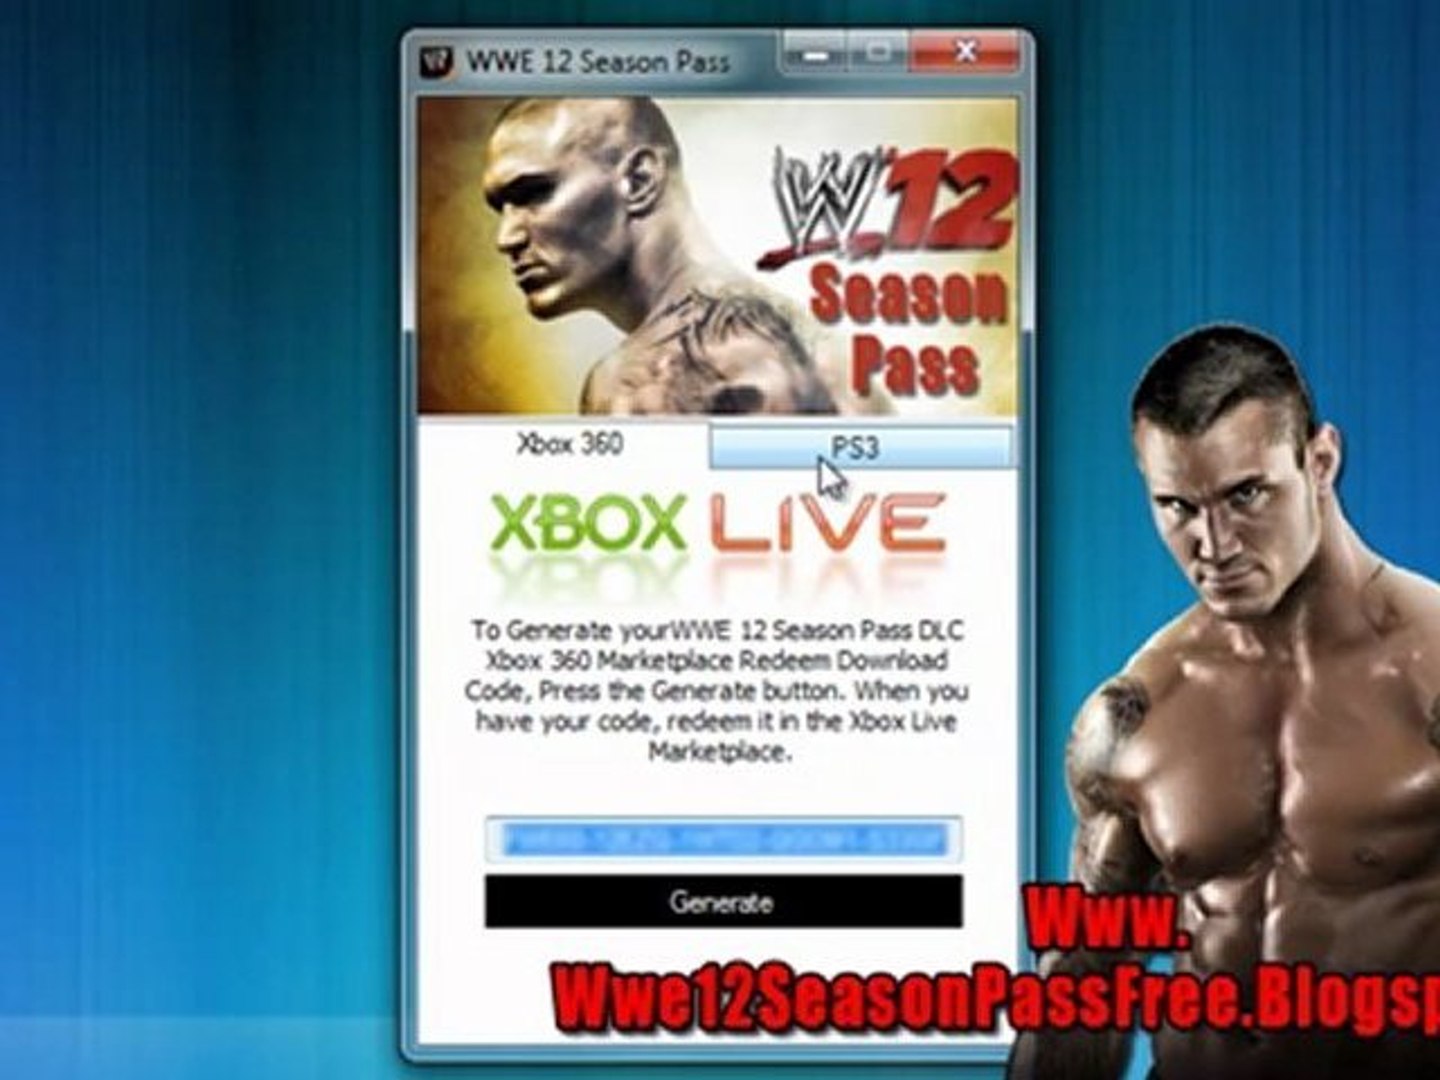 How to Get WWE 12 Season Pass Free on Xbox 360 And PS3 - video Dailymotion